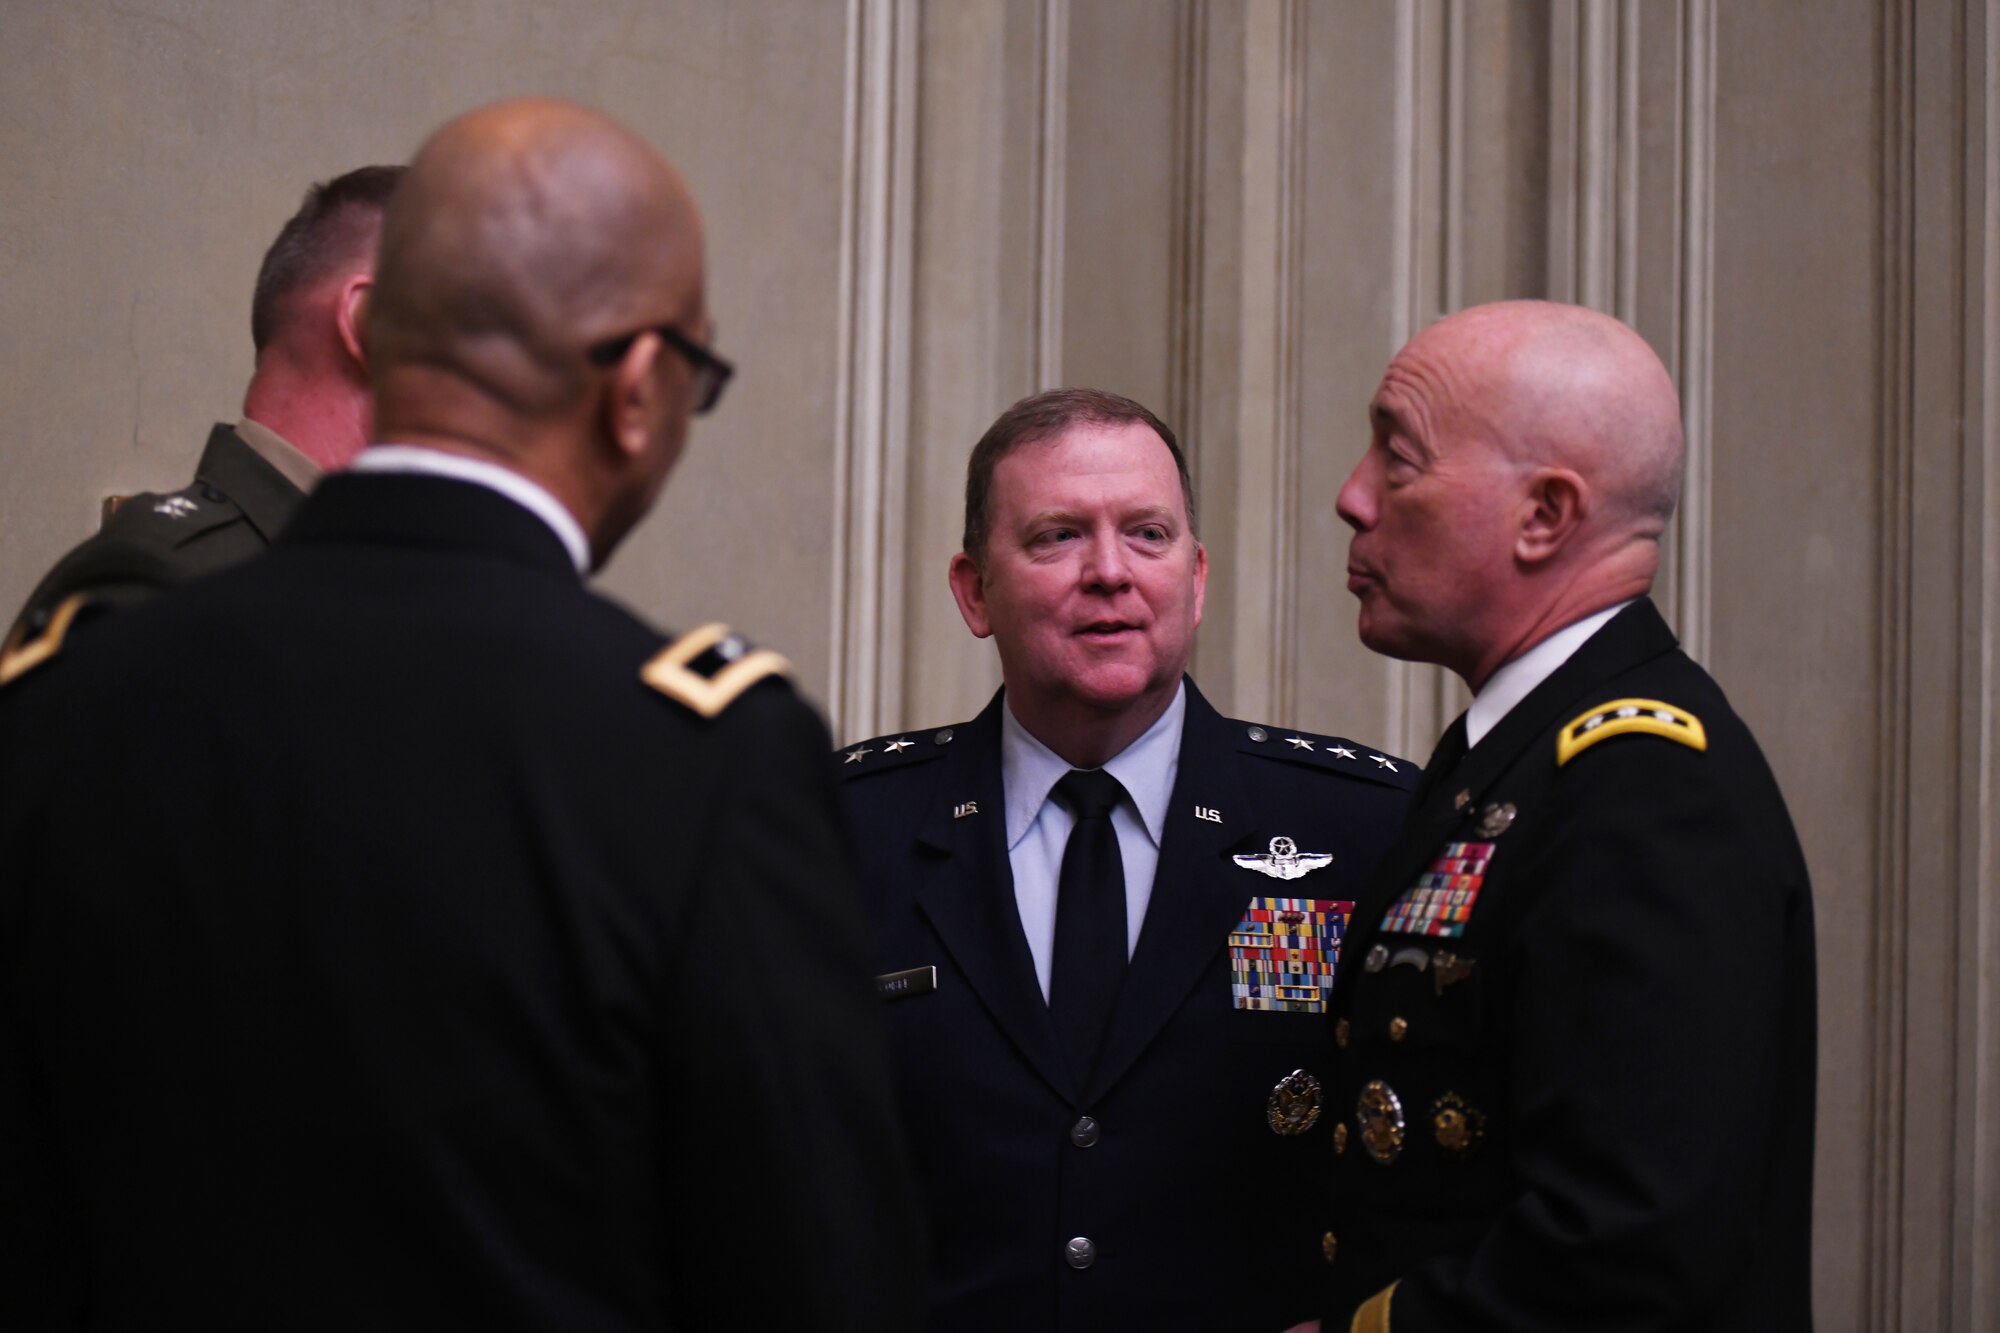 Lt. Gen. Scobee highlights Air Force Reserve successes on Capitol Hill